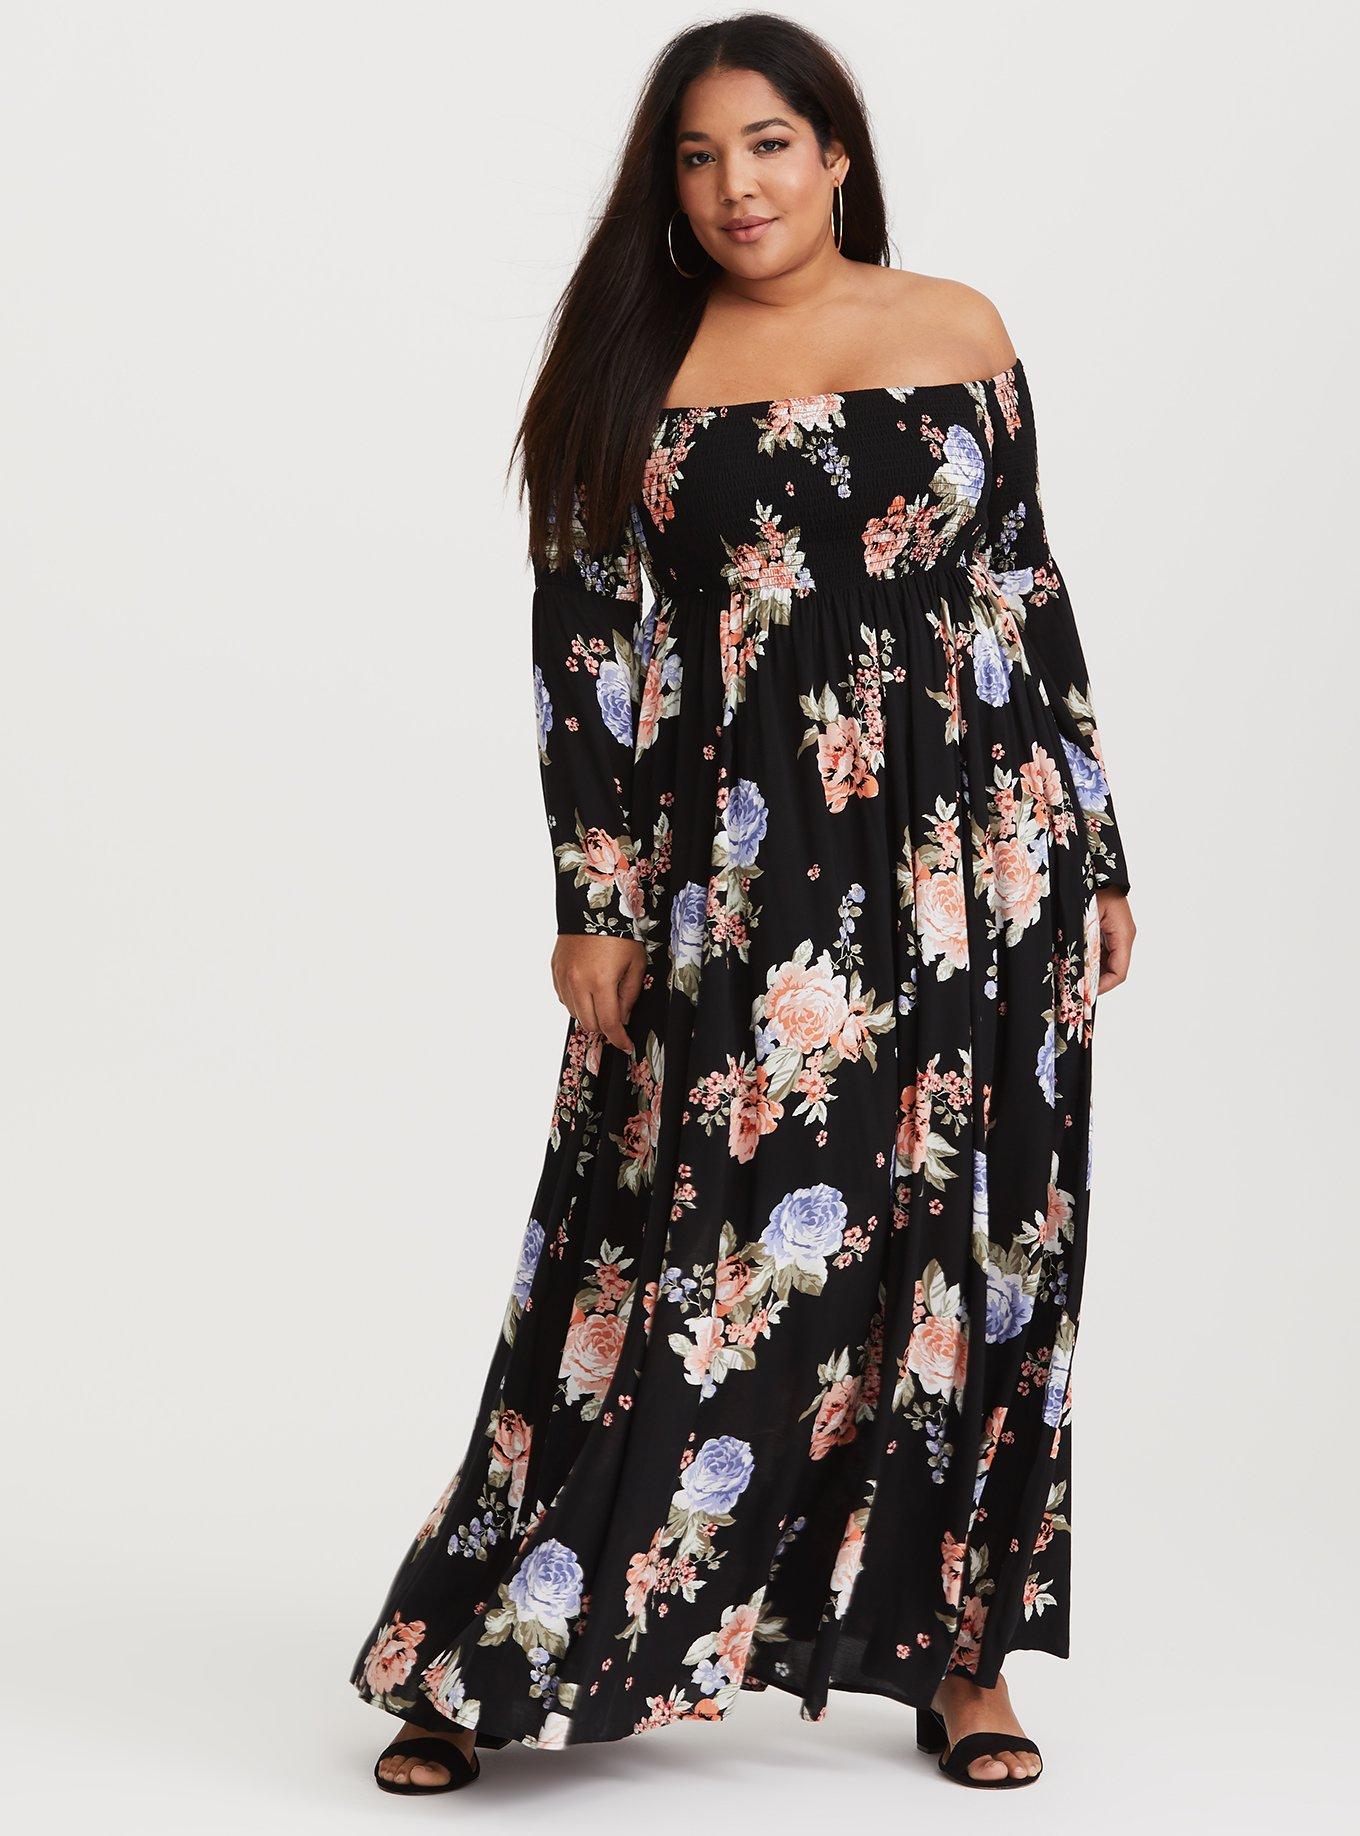 Plus Size - Floral Smocked Maxi Dress (Short Inseam Now Available) - Torrid